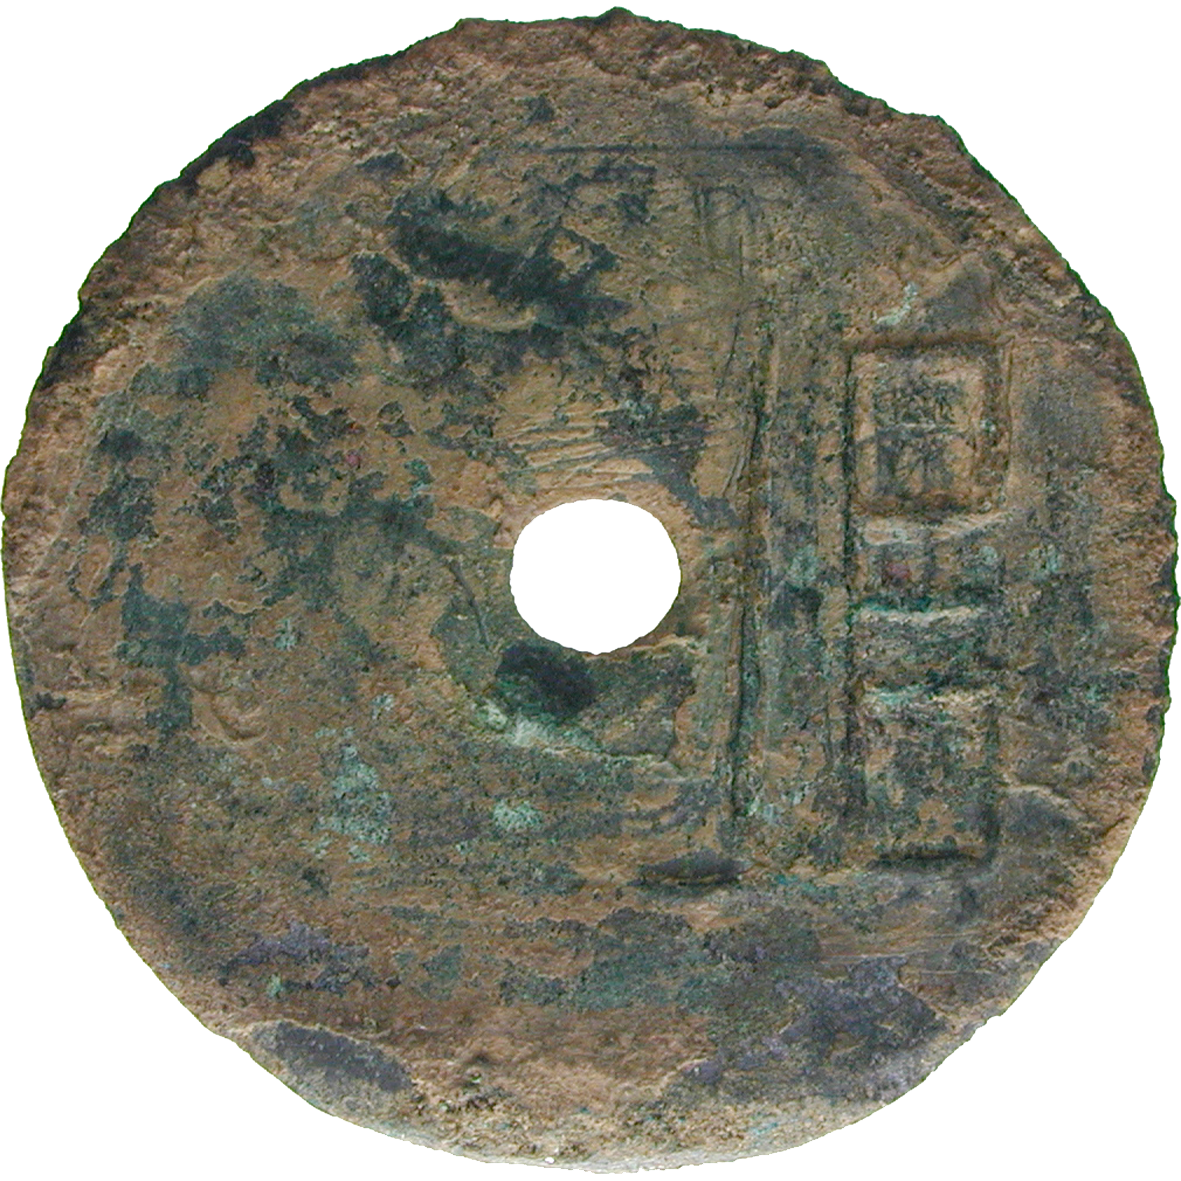 China, County of Wei, Ring Coin Huanqian (obverse)